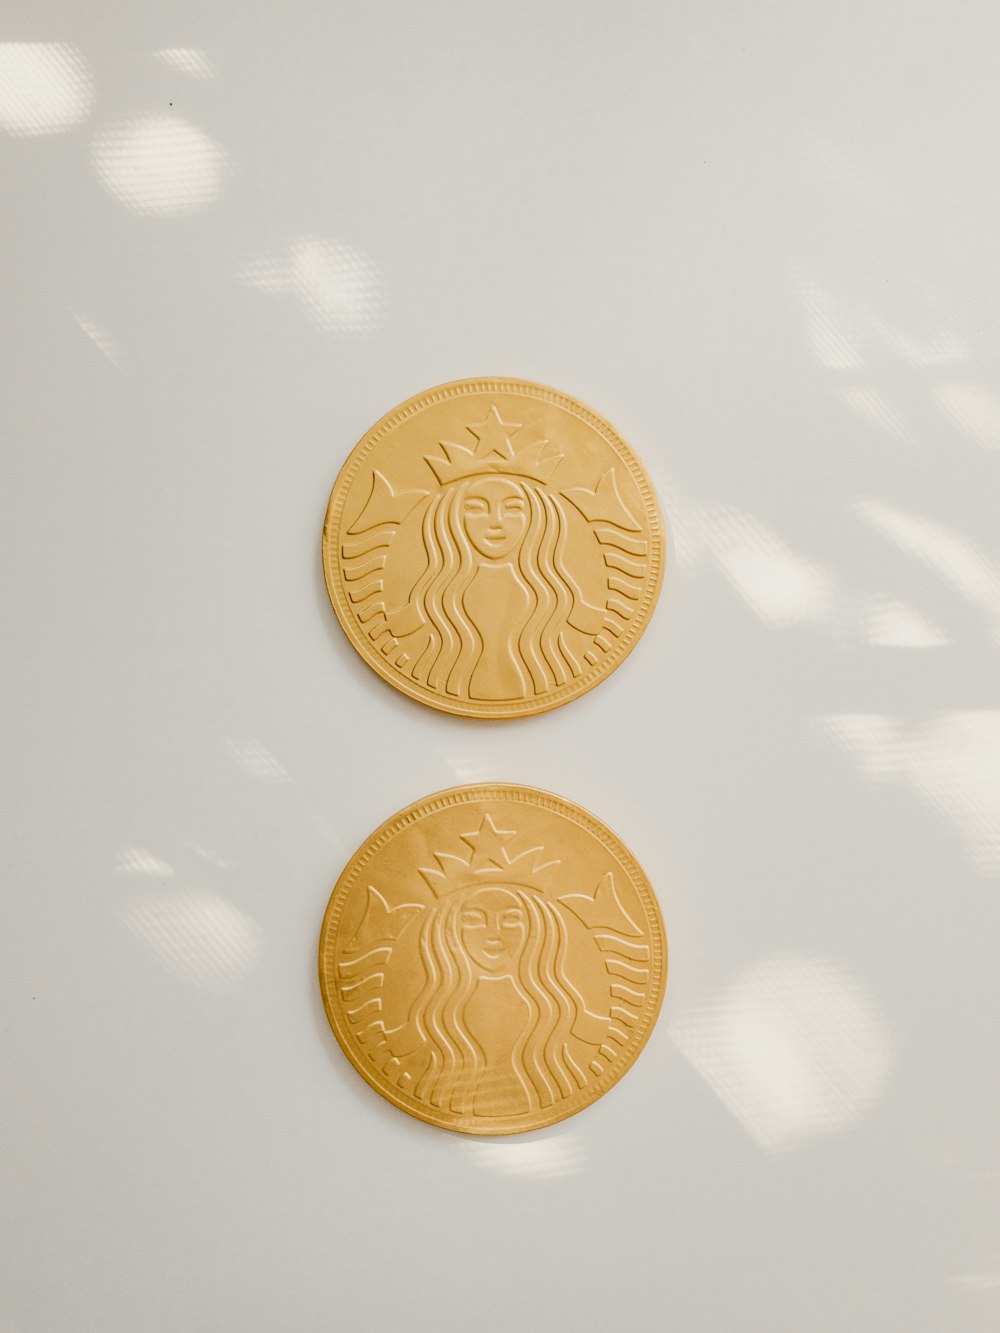 two round gold colored coins